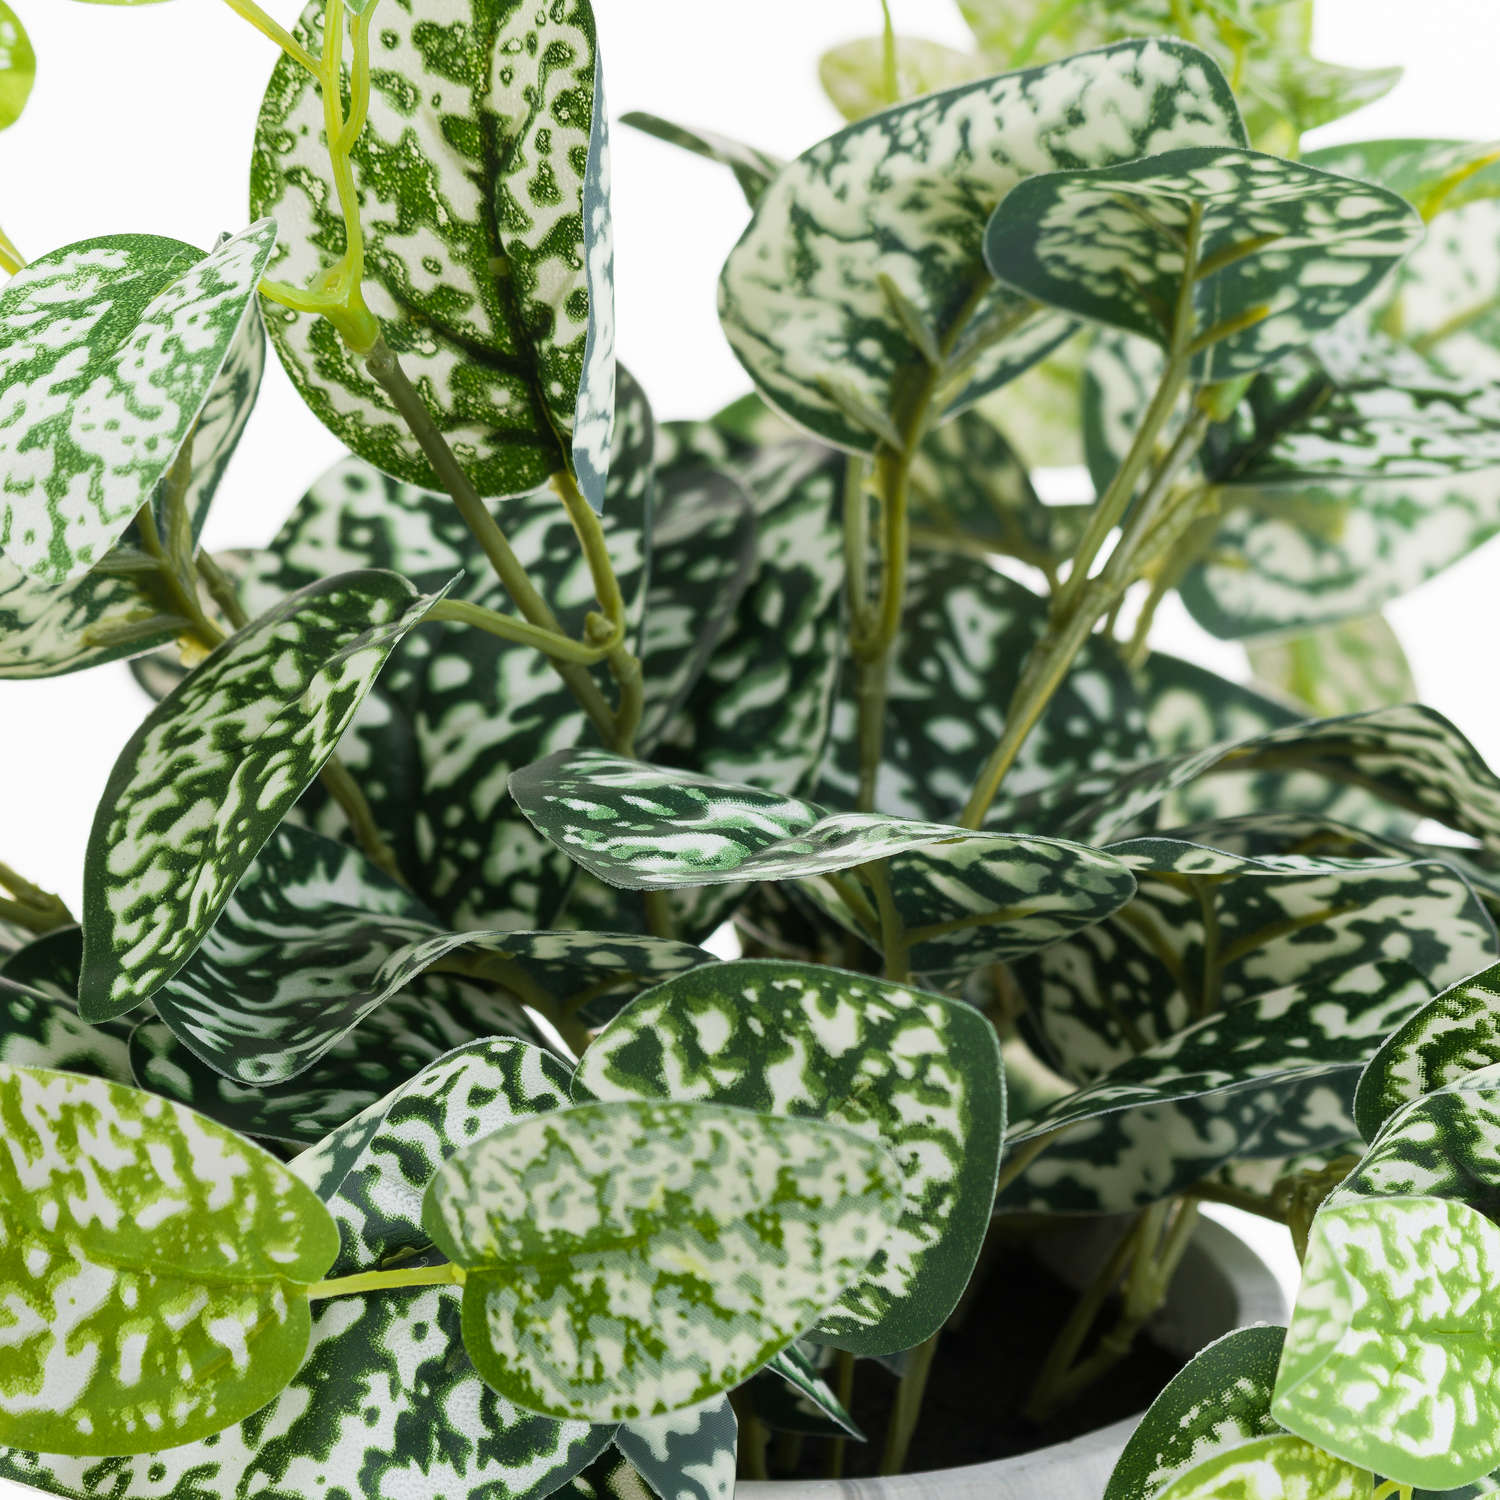 Variegated White And Green Nerve Plant - Image 2